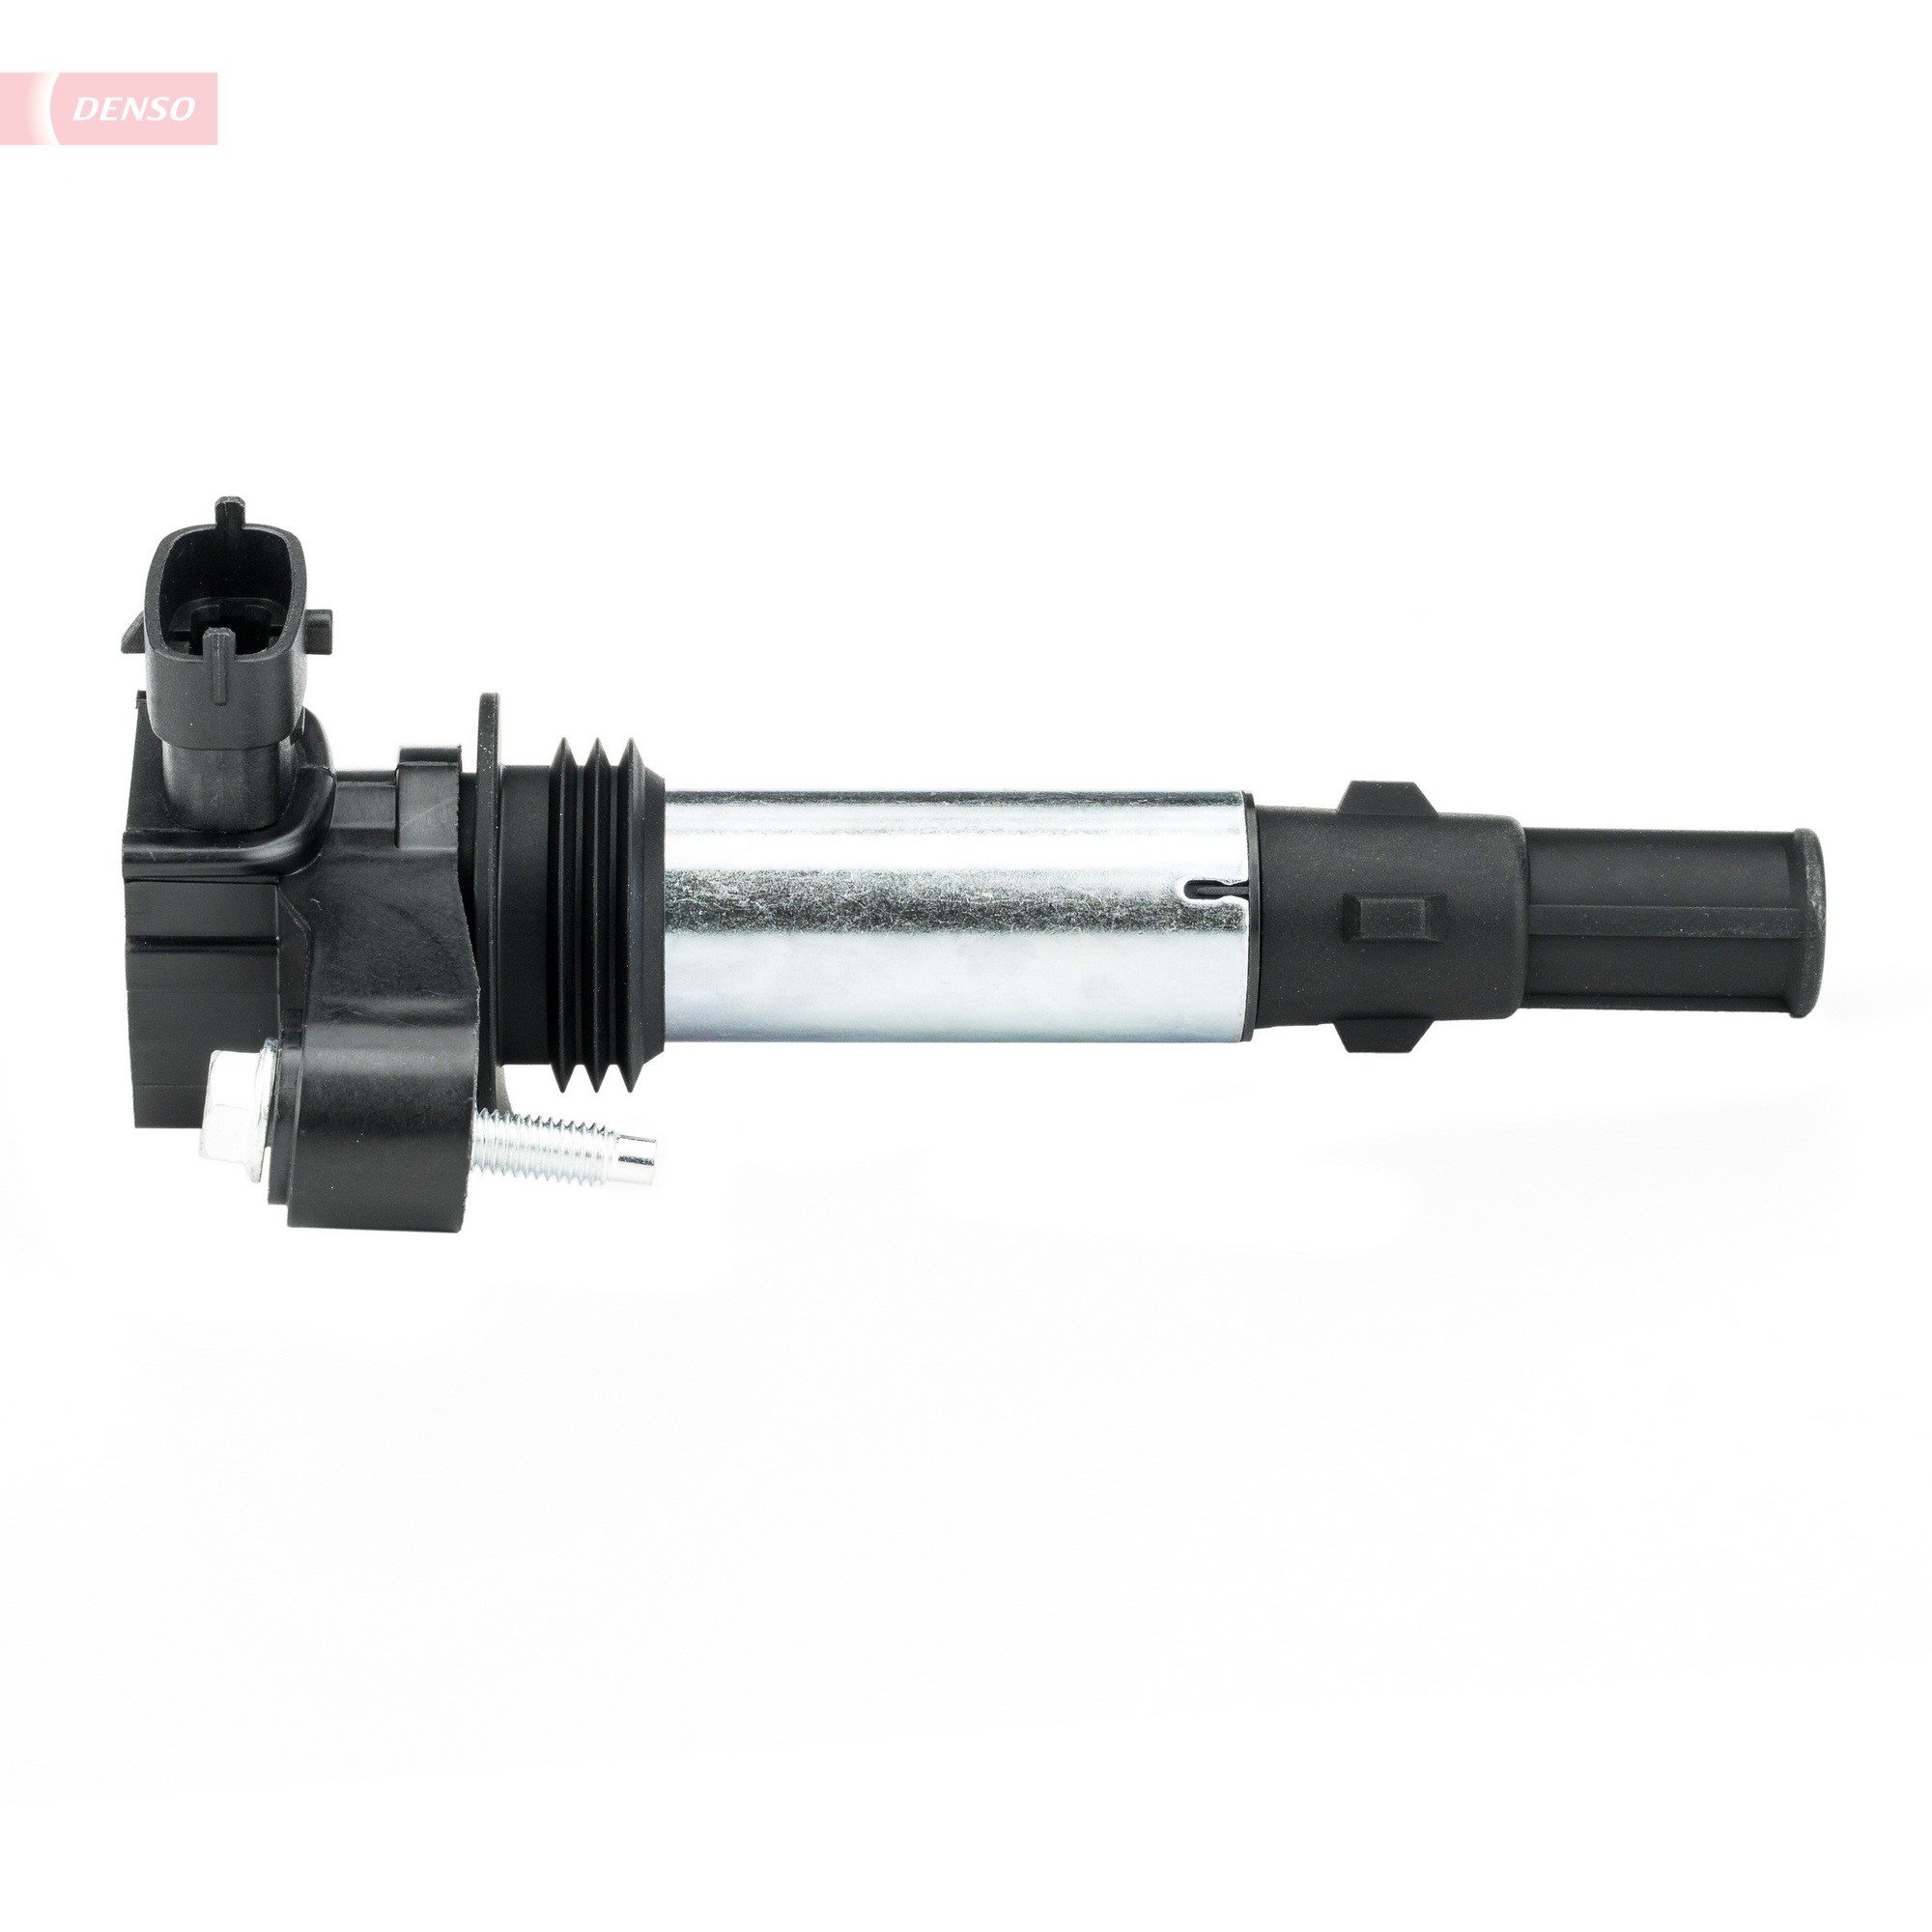 Ignition Coil DENSO DIC-0204 2